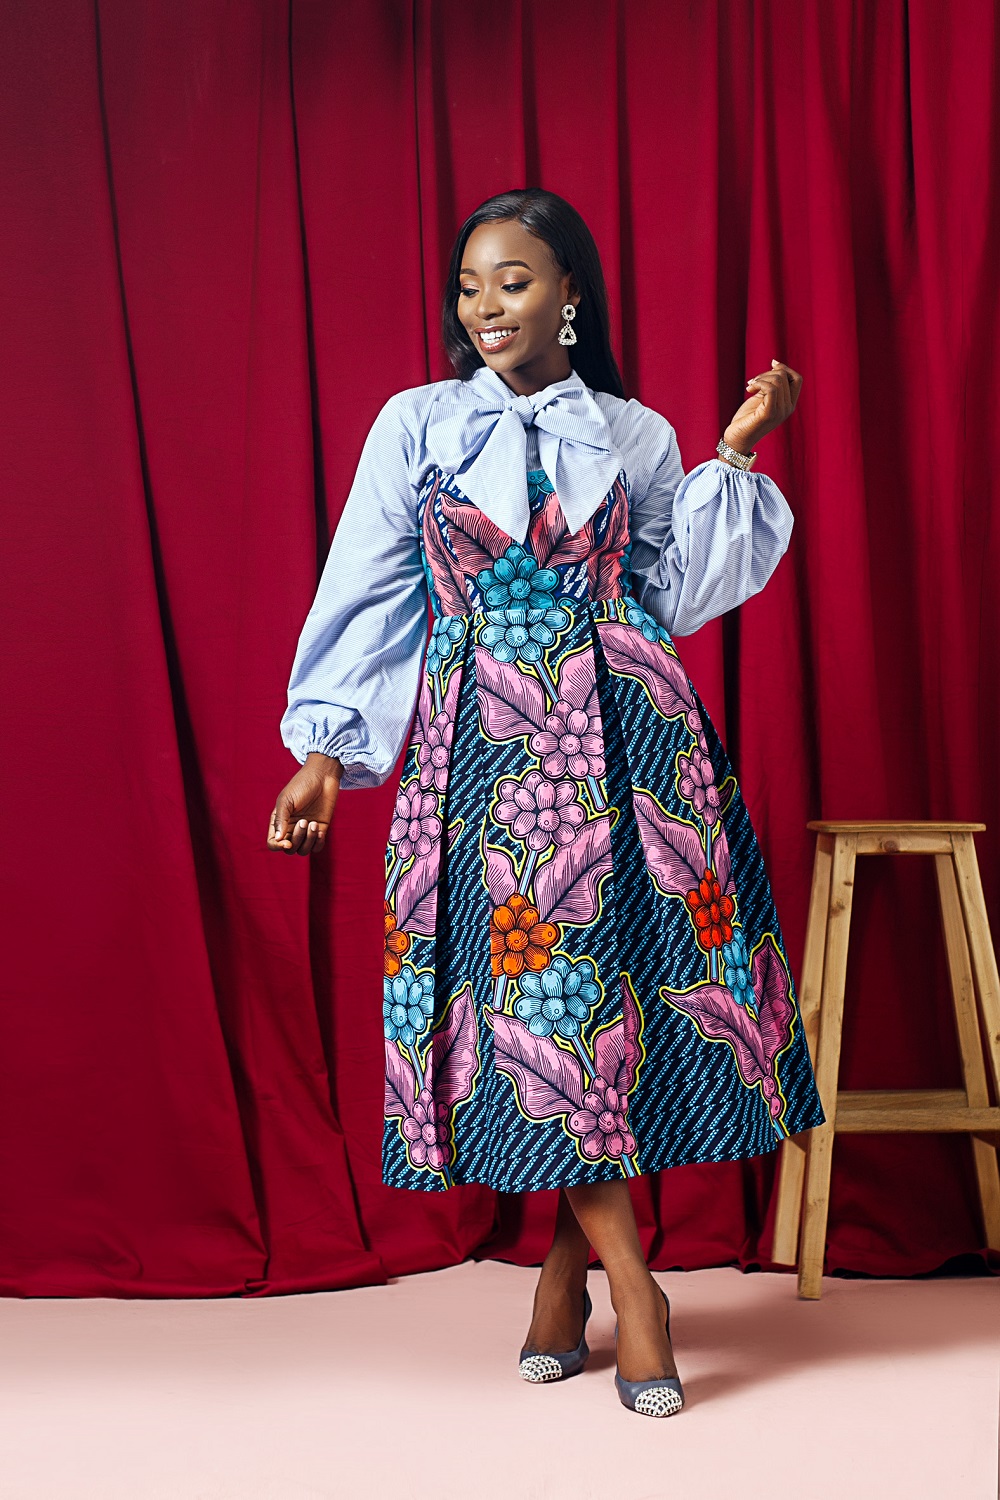 Afraid Of Prints? Erilyn’s Spring/Summer 2018 Collection Will Change Your Mind